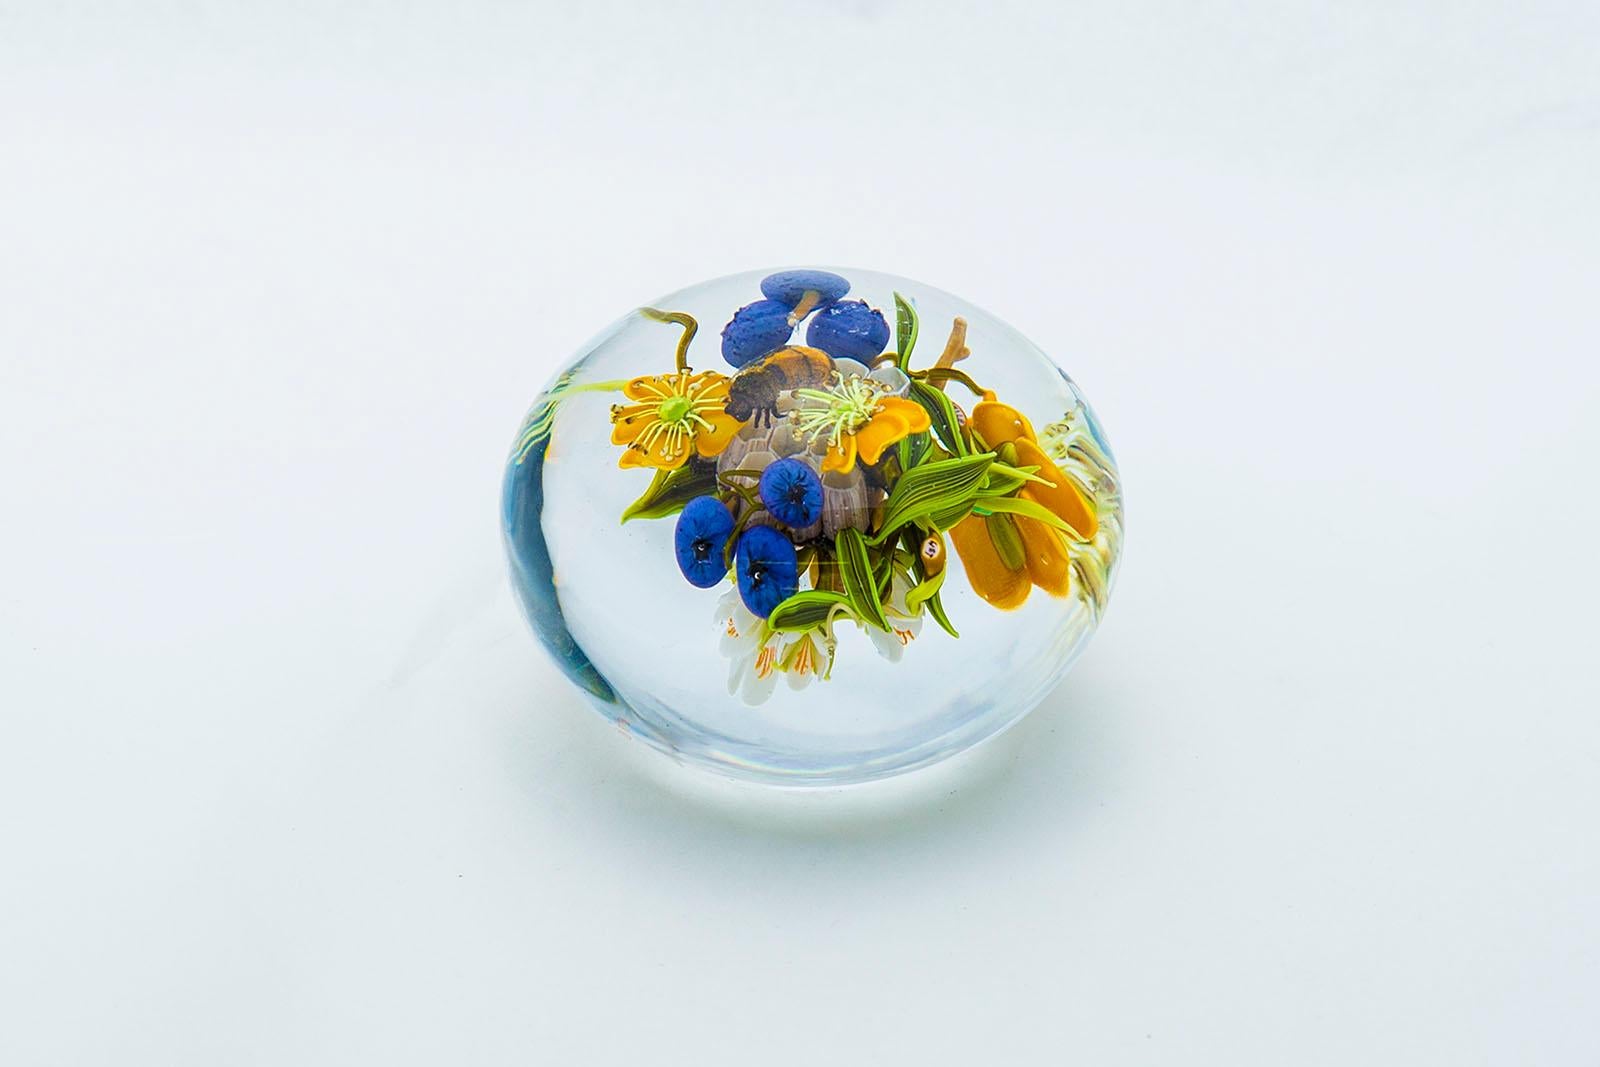 Artist: Paul Stankard
Title: Paul Stankard Paperweight Seeds Cane and Yellow Lillys with Wildflowers and Bursting seed Pots
Size: 3.5